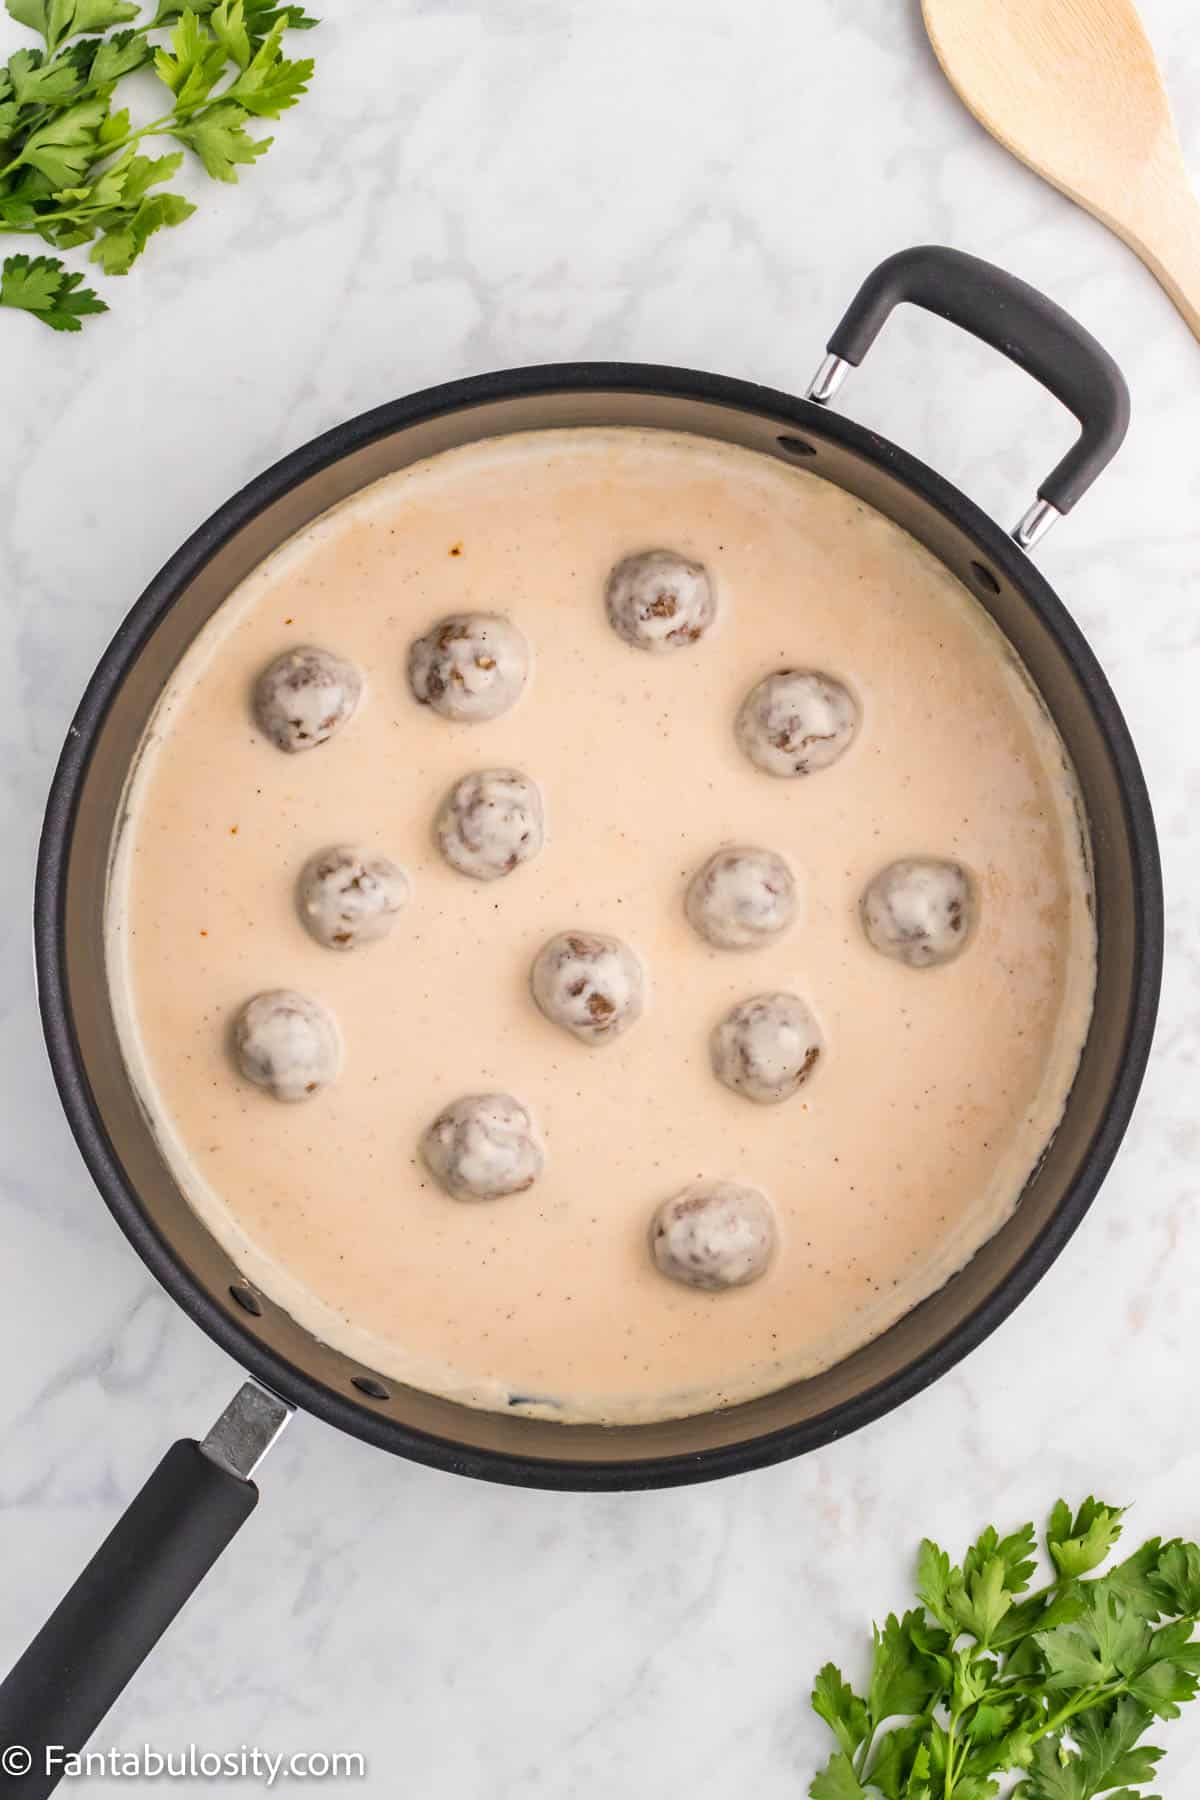 Cooked meatballs have been coated in thick creamy sauce and are simmering in a large black skillet